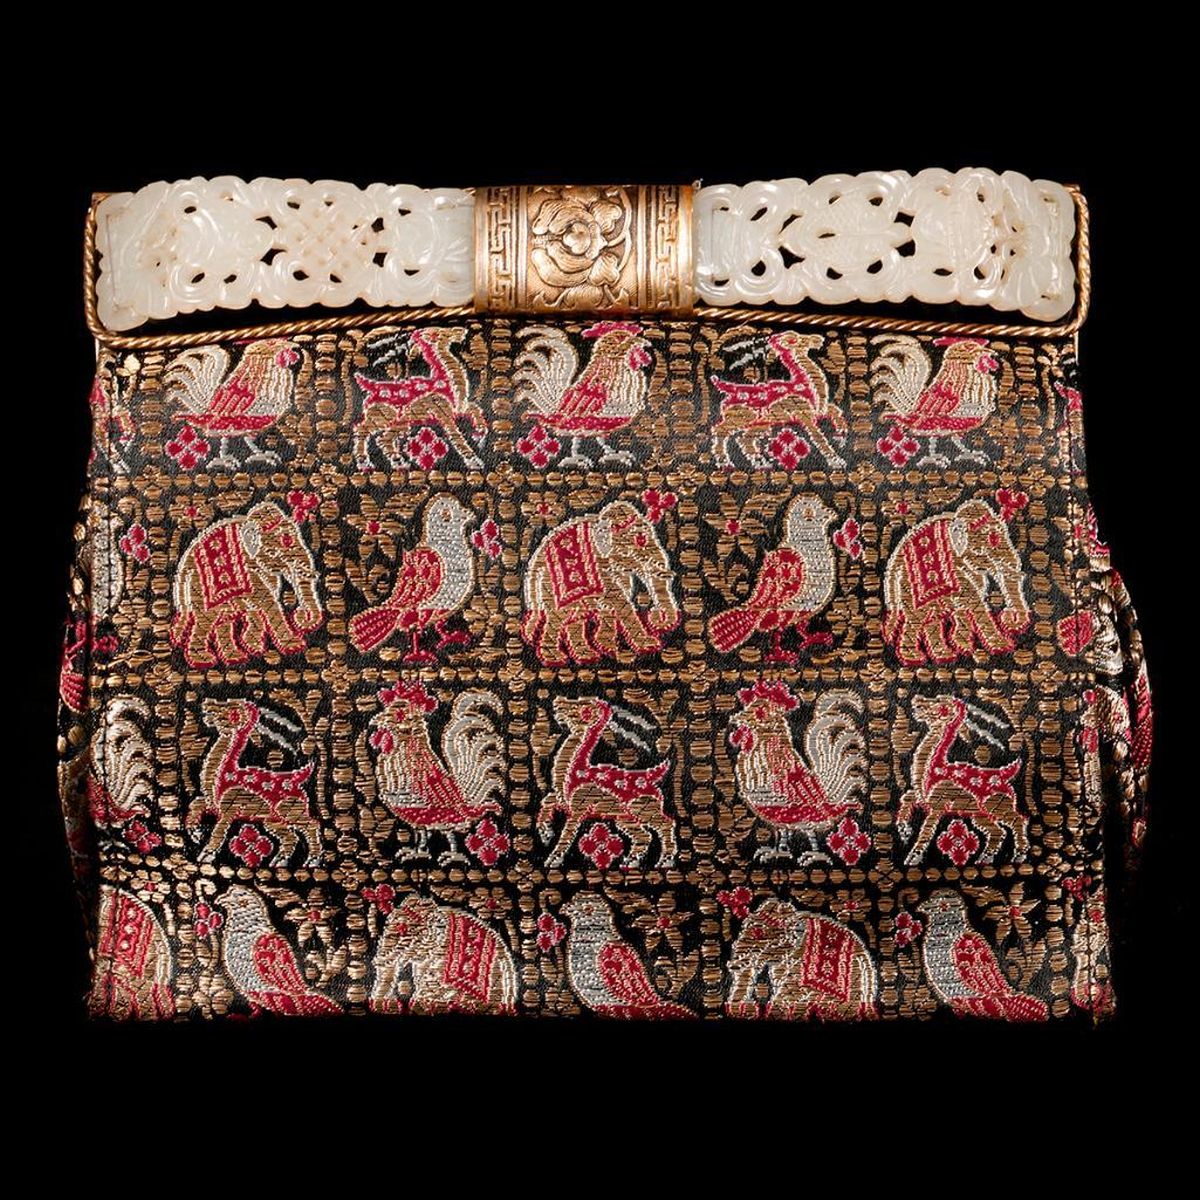 Lot 167: A Wire Mesh Purse with a 19th-Century Chinese Jade and Silver Handle, depicting various animals. Measuring 5 inches high x 6 wide in a modern presentation box.  Estimate: $2,000-3,000